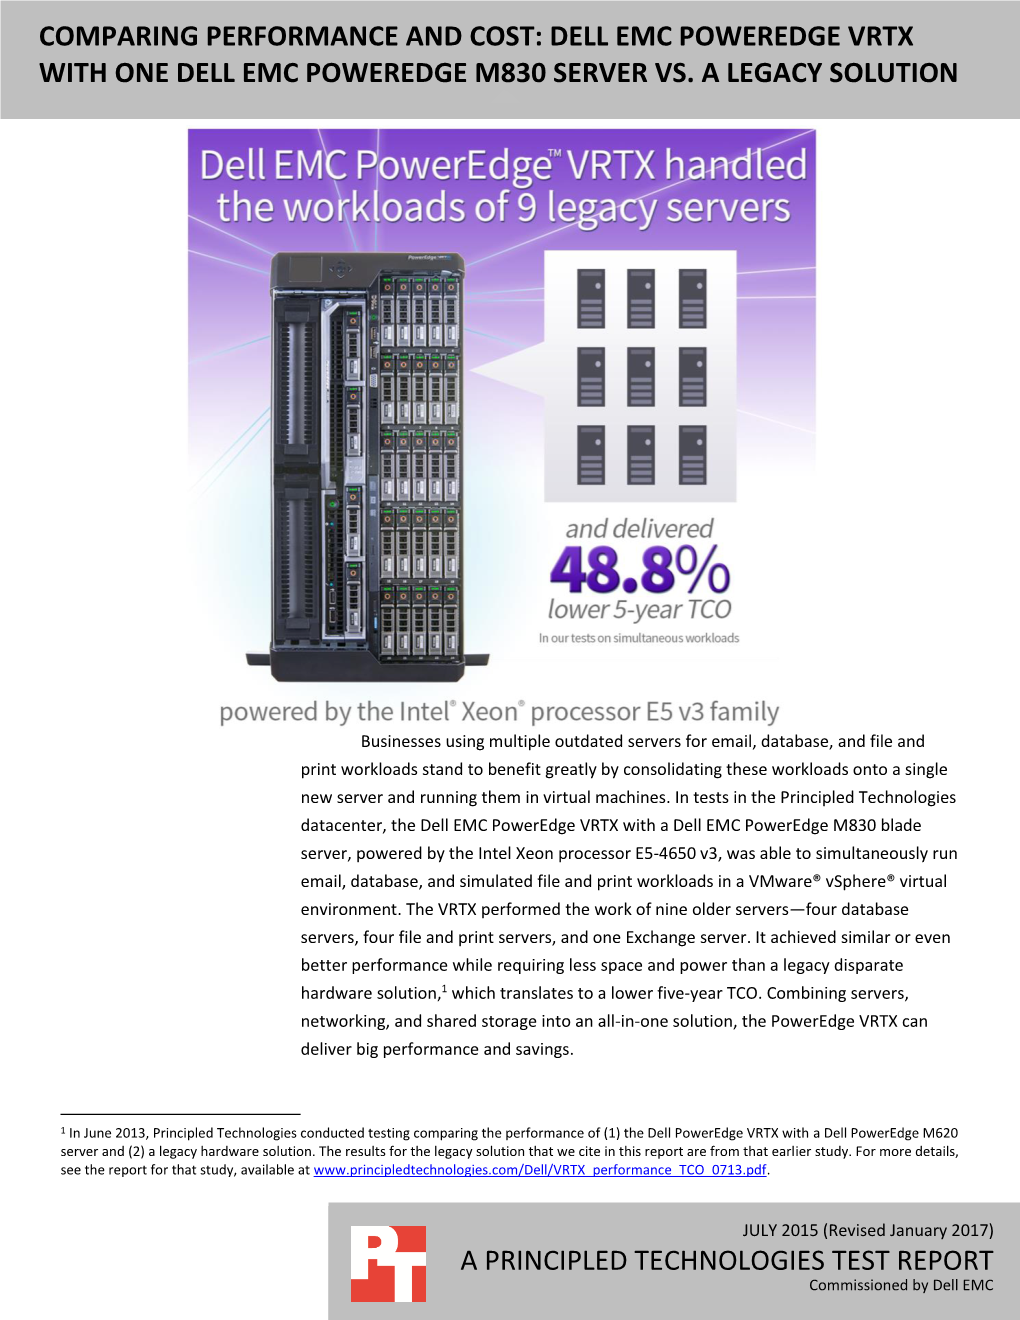 Replace Nine Older Servers with One Dell Emc Poweredge Vrtx